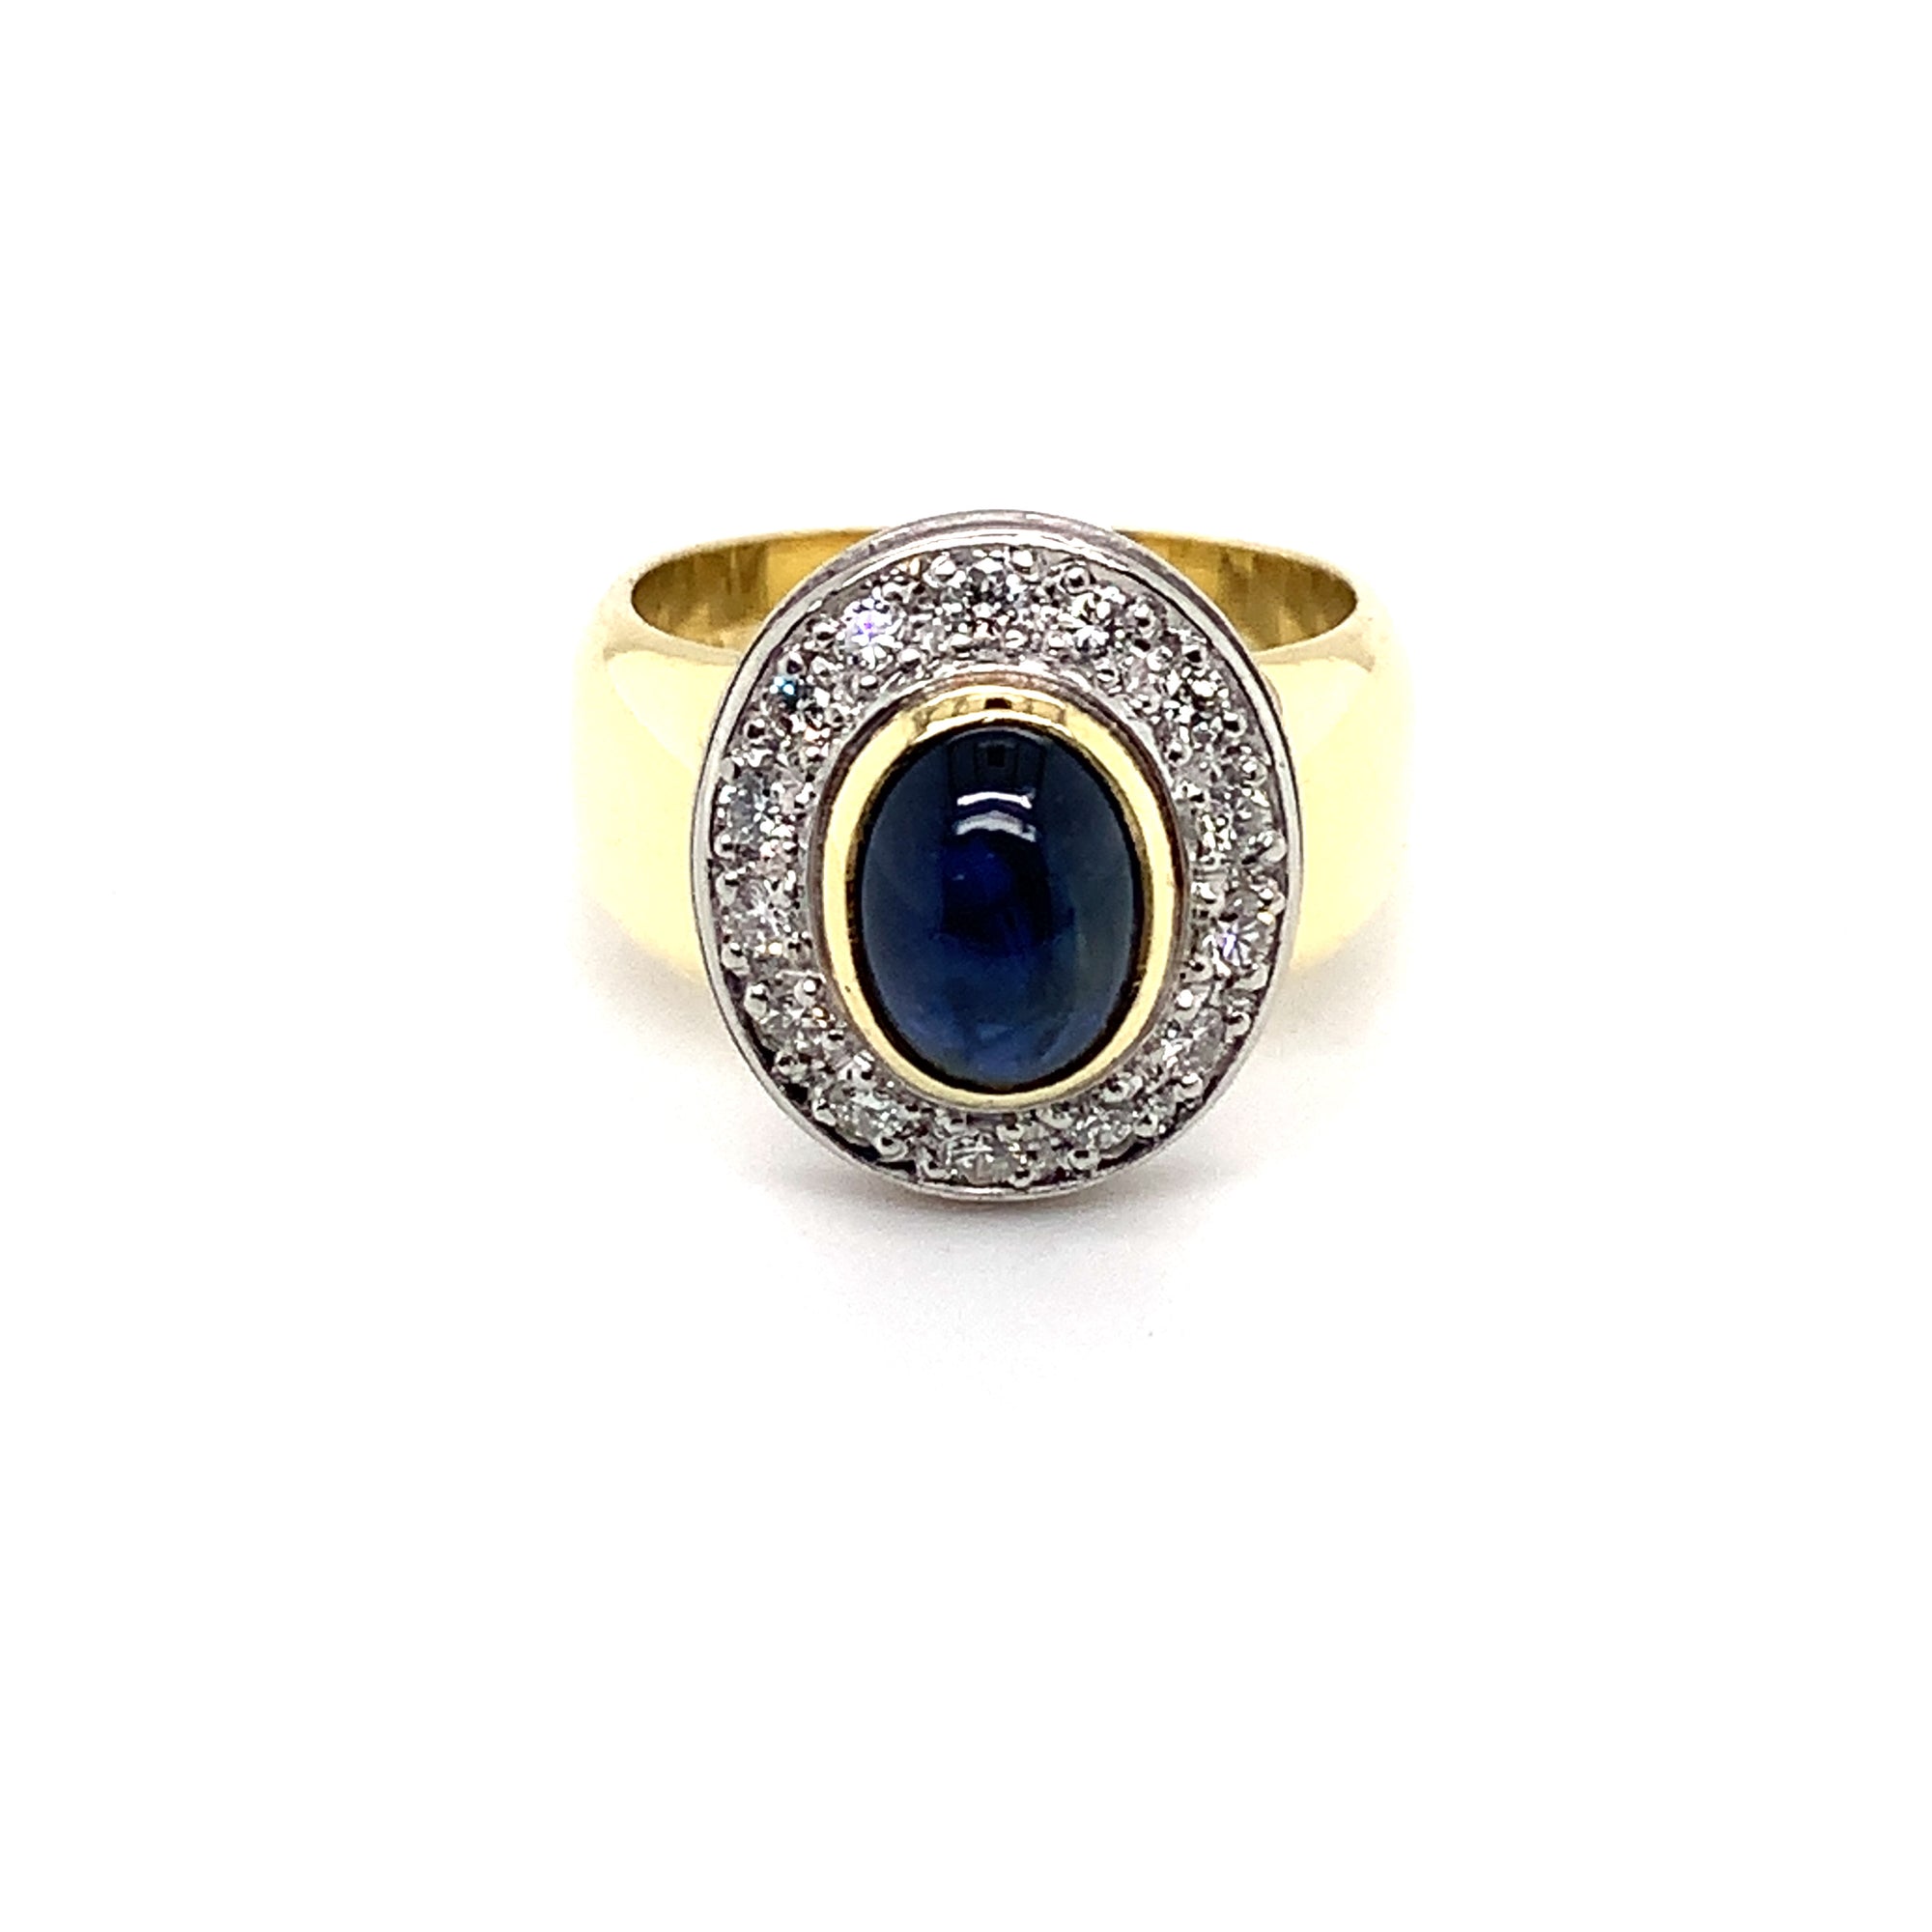 Vintage Oval Blue Cabochon Sapphire and Diamond Halo Ring in 18ct Yellow Gold